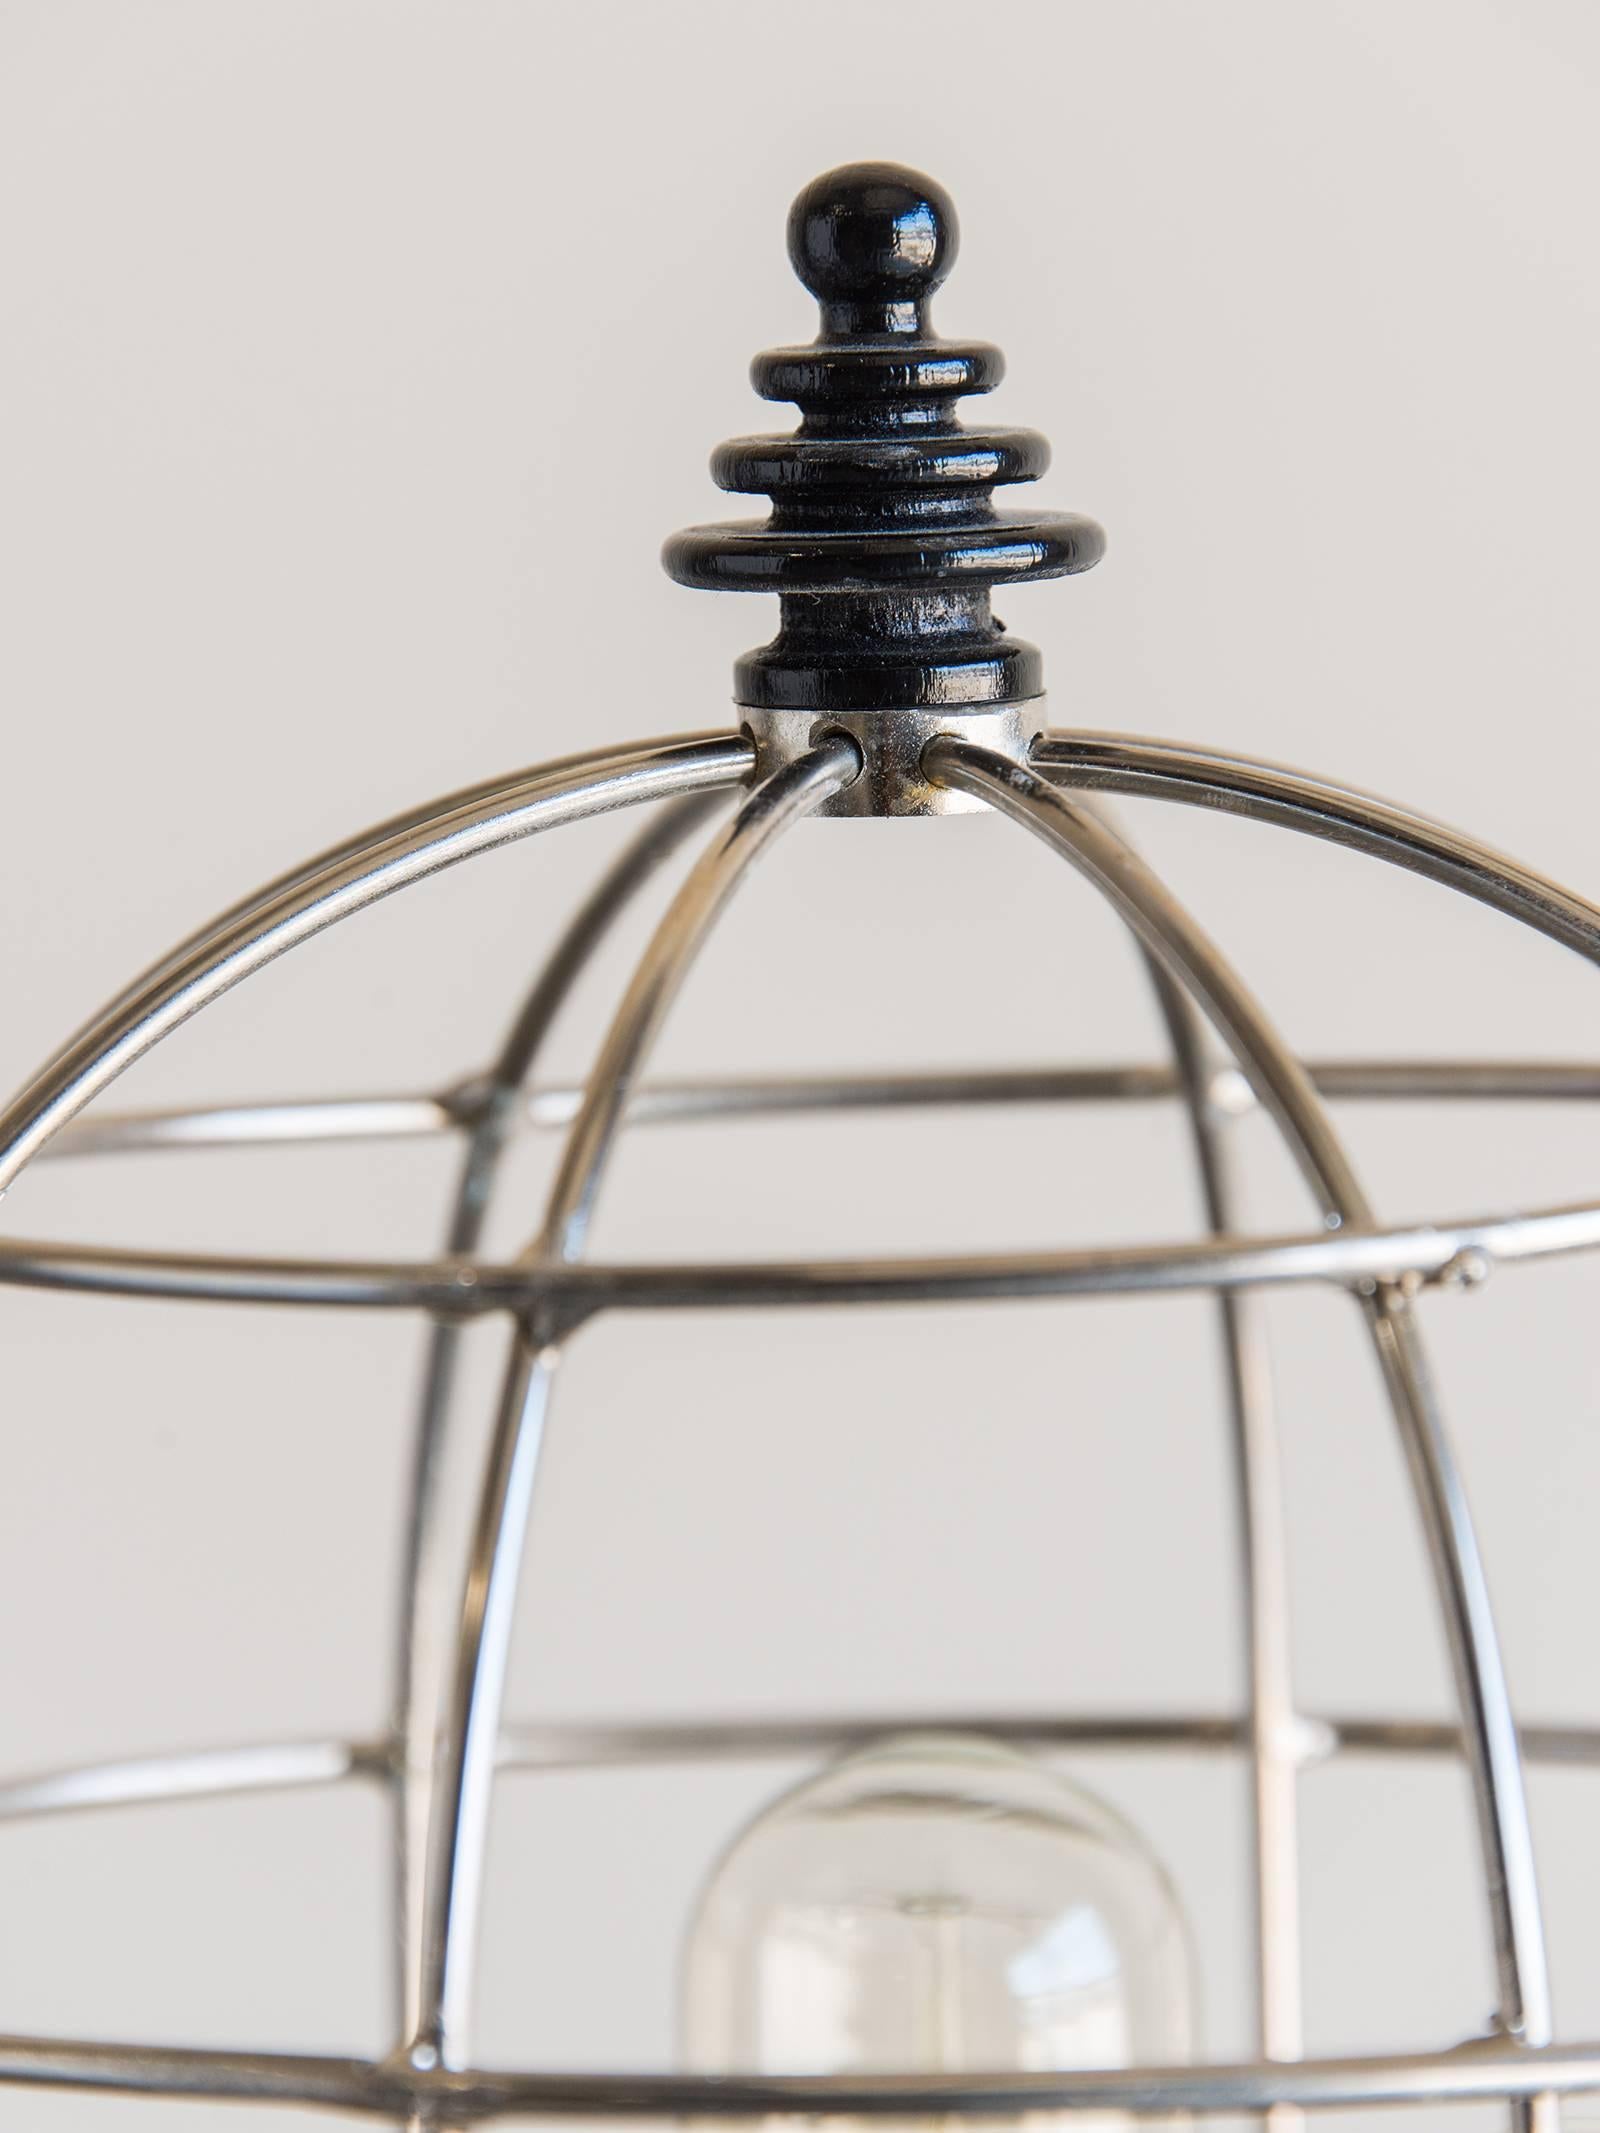 Be the first to see our new arrivals directly through 1stdibs! Please click follow dealer below. 

This modern lamp has a striking appearance due to the silver open cage shaped like a beehive and the jet black circular base. The base has a ridged